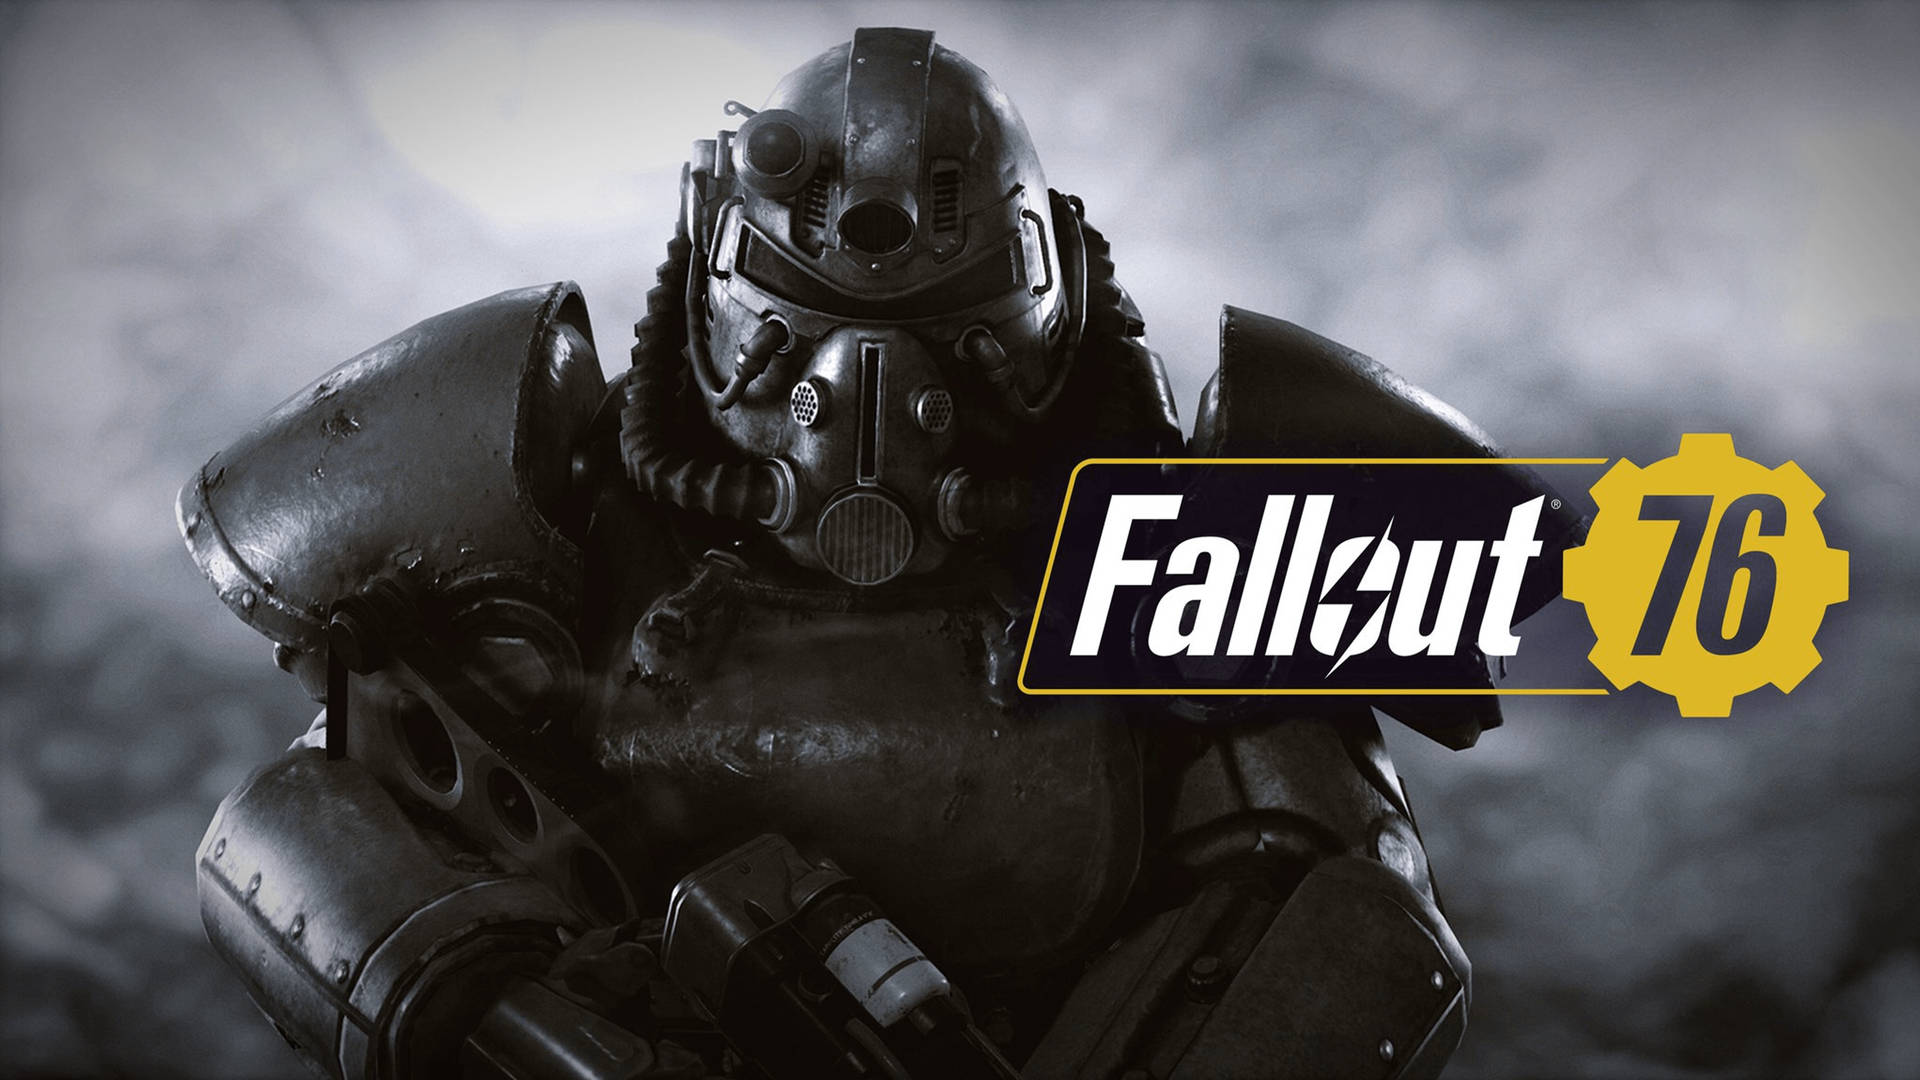 Power Armor Fallout 76 Poster Background